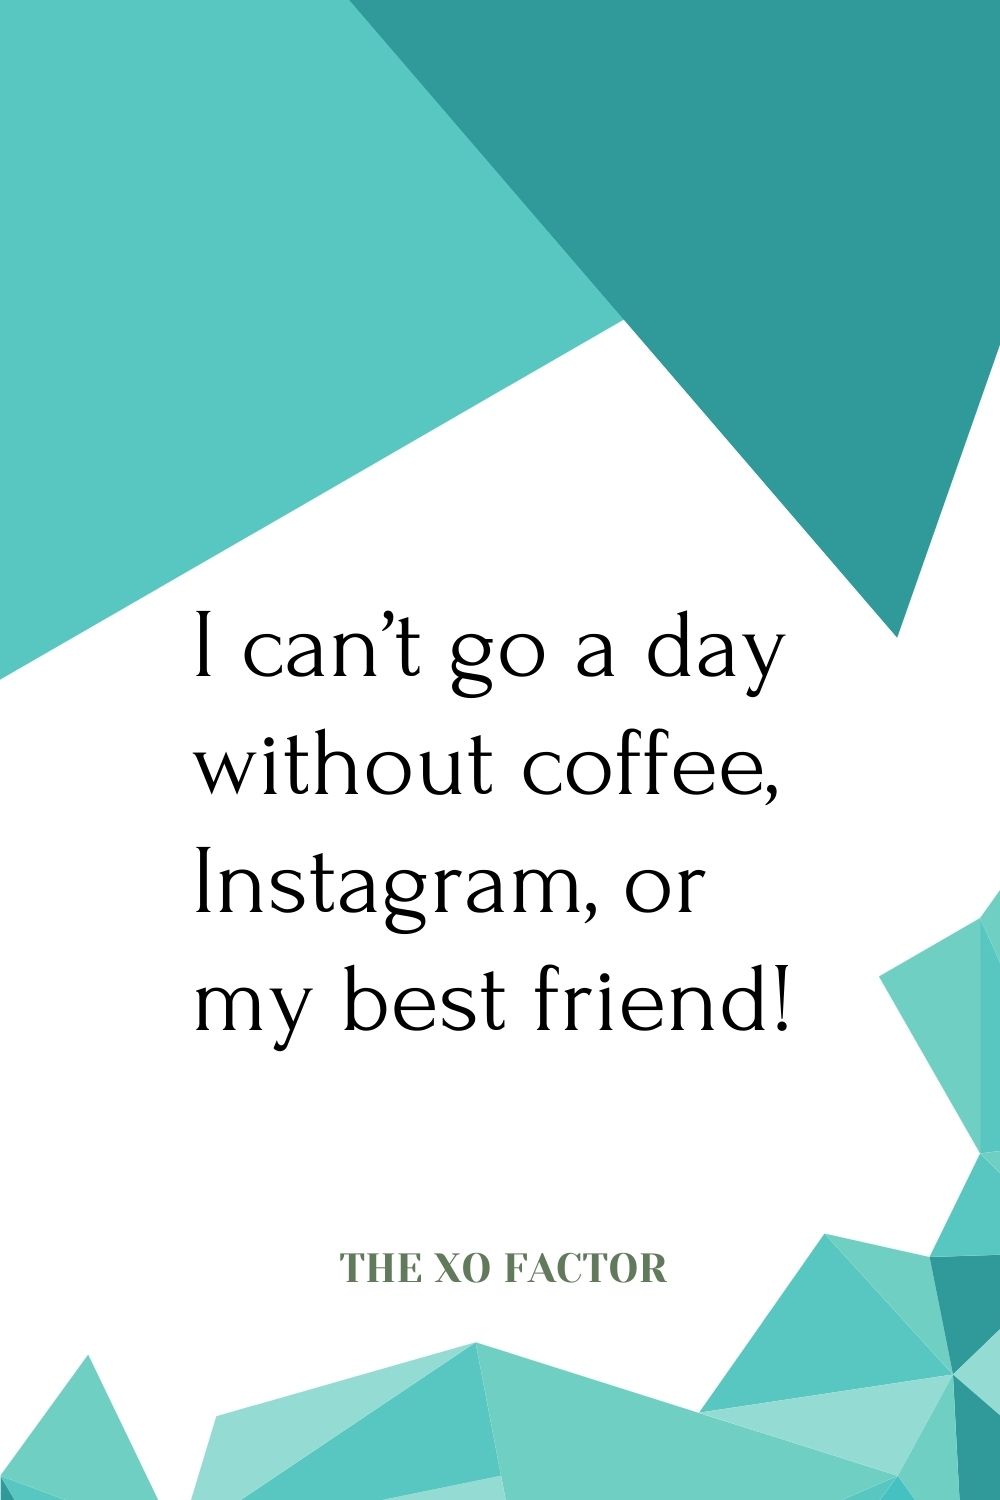 I can’t go a day without coffee, Instagram, or my best friend!